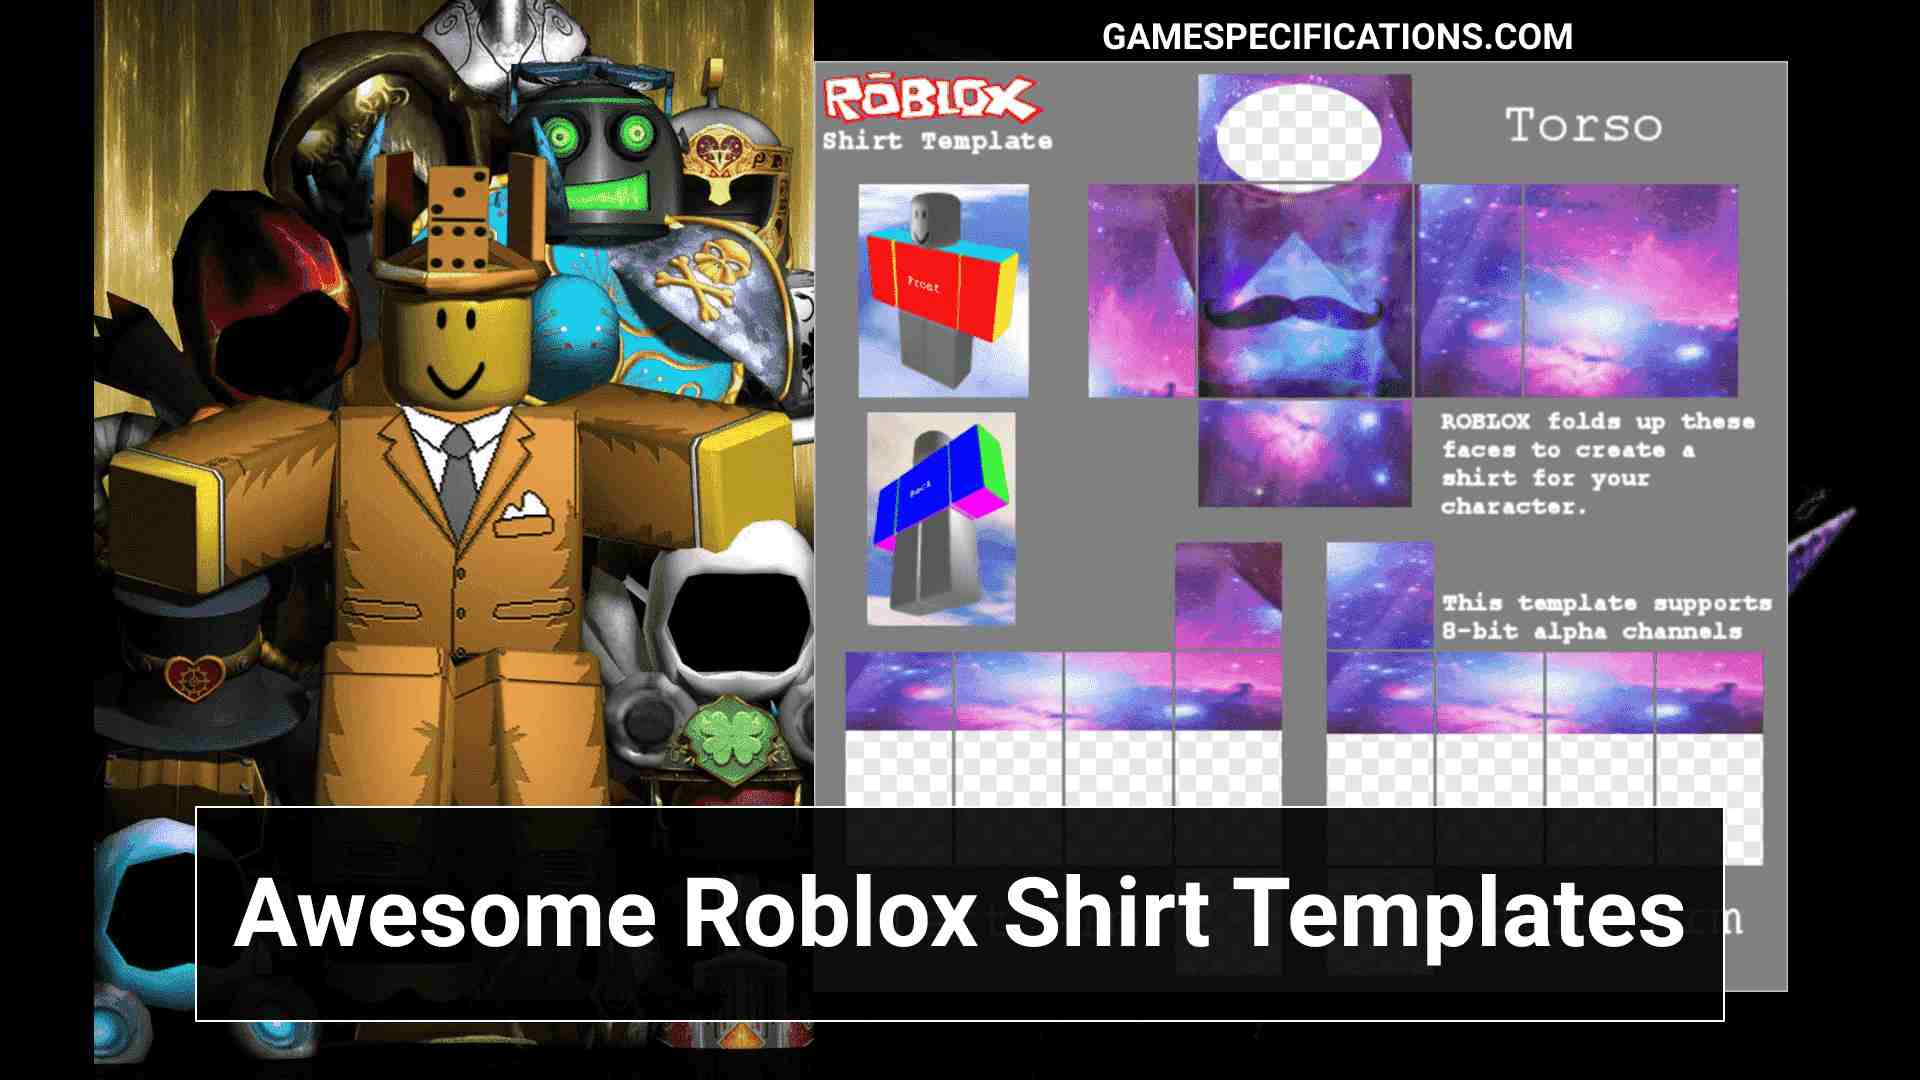 25 Coolest Roblox Shirt Templates Proved To Be The Best Game Specifications - how do you change the roblox default clothes color